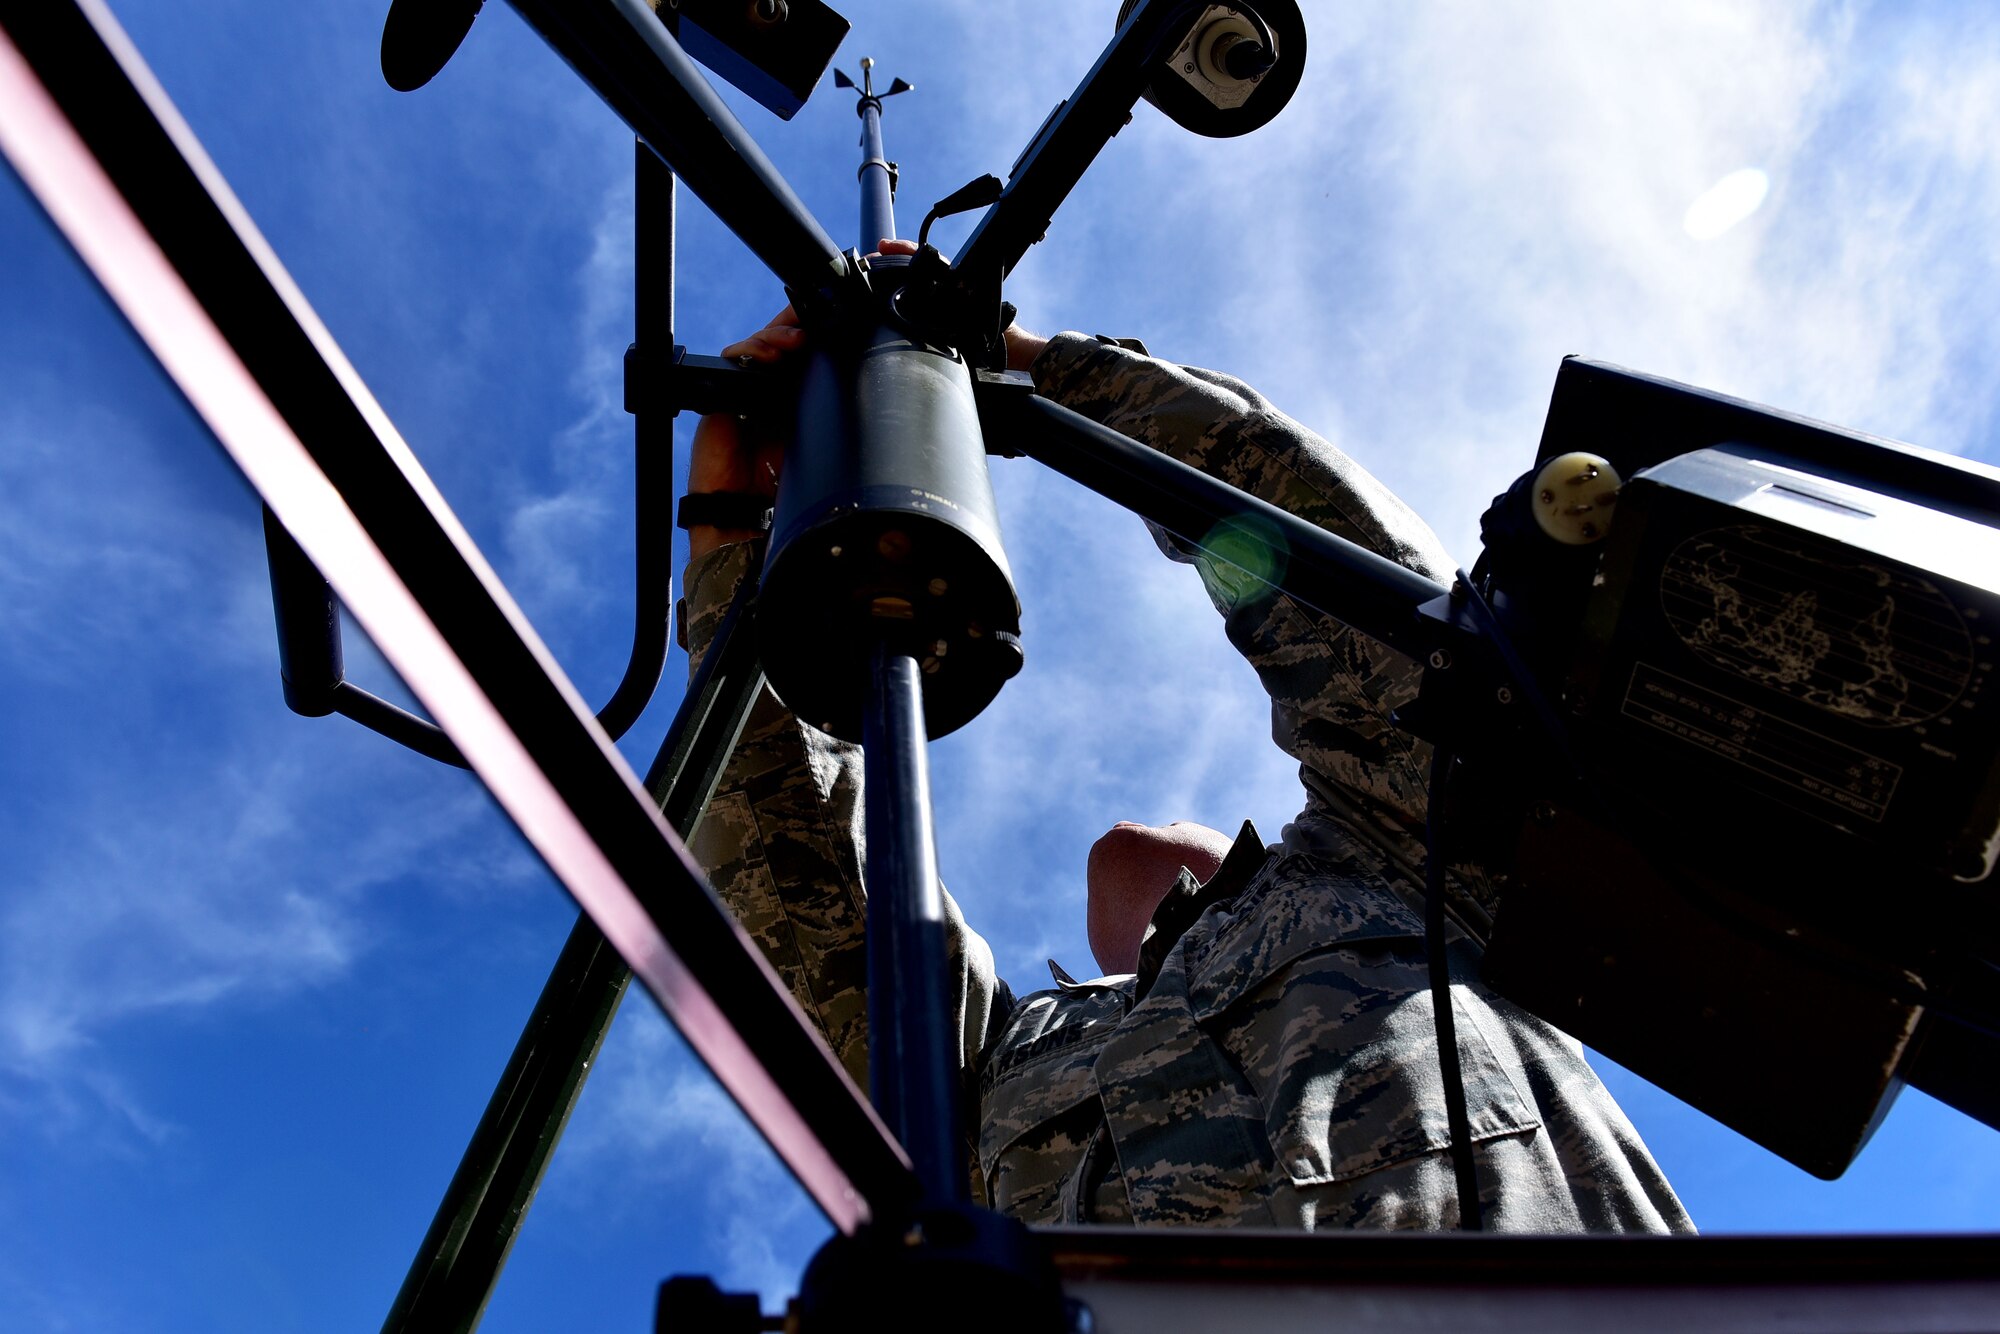 Staff Sgt. Jason Parsons, 19th Operations Support Squadron NCO in charge of the weather flight, assembles a Tactical Meteorological Observing System Oct. 23, 2017, at Little Rock Air Force Base, Ark. The system is capable of reading multiple aspects of weather including: wind direction, cloud height, temperature and dew point. (U.S. Air Force photo by Airman Rhett Isbell)